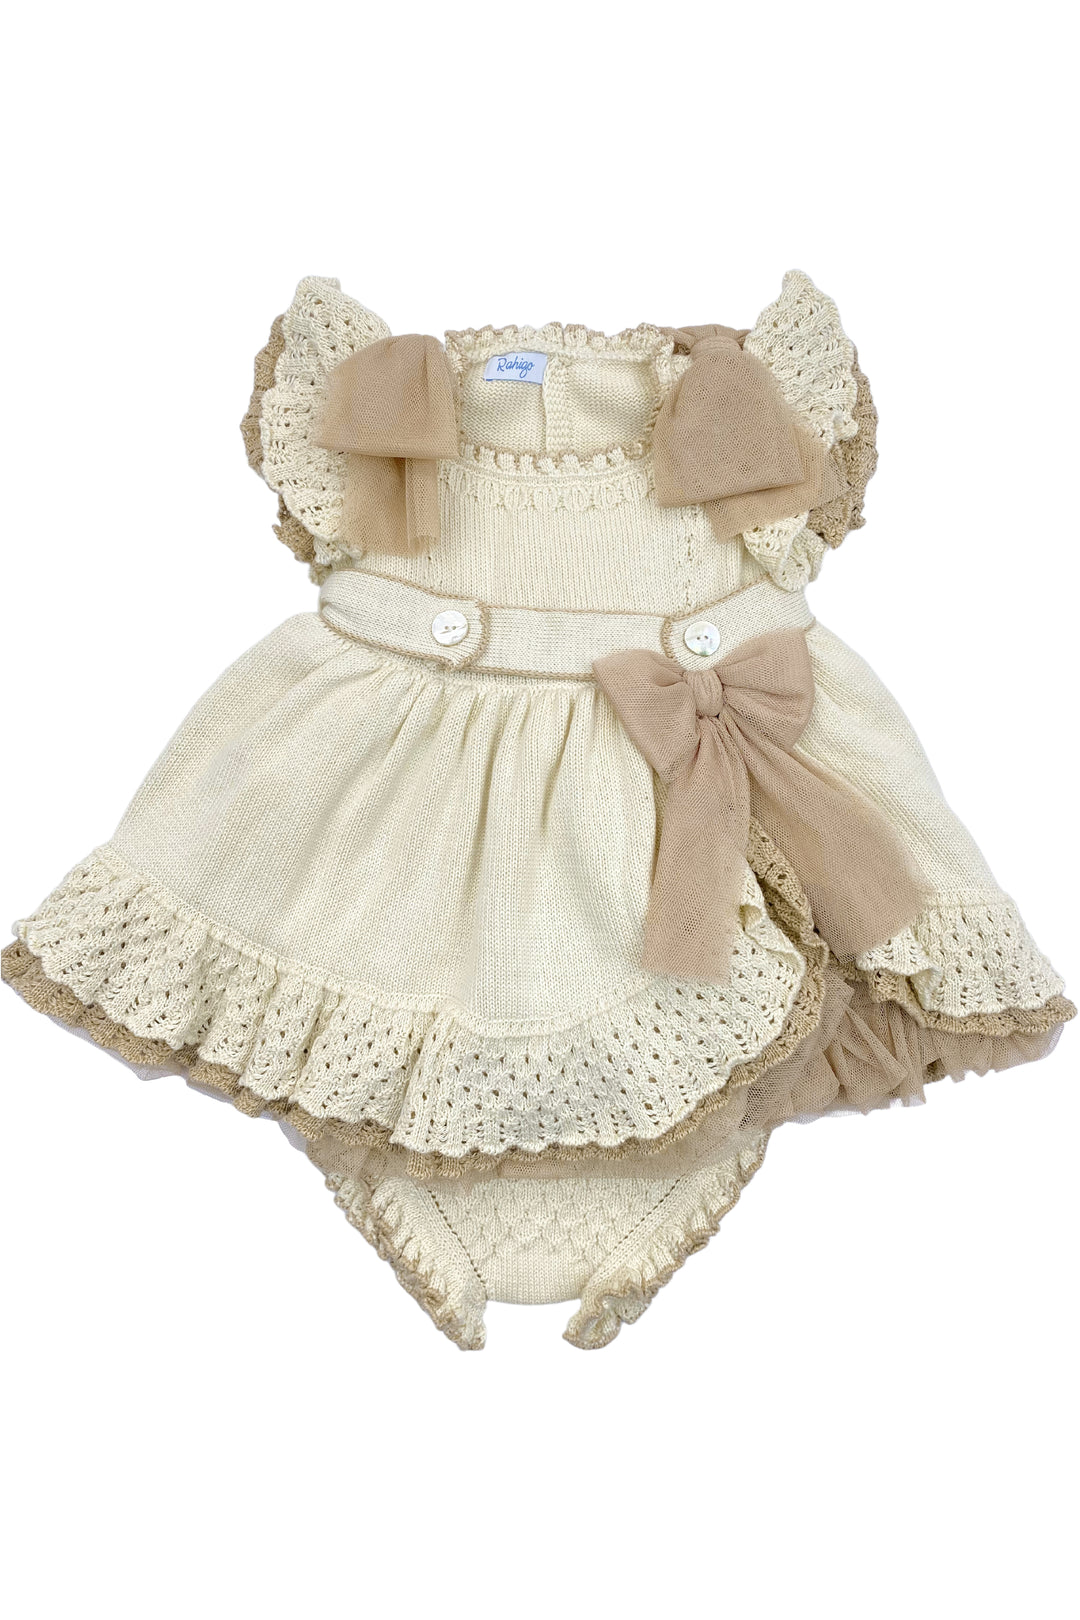 Rahigo "Beatrice" Cream & Camel Knit Tulle Dress & Bloomers | iphoneandroidapplications